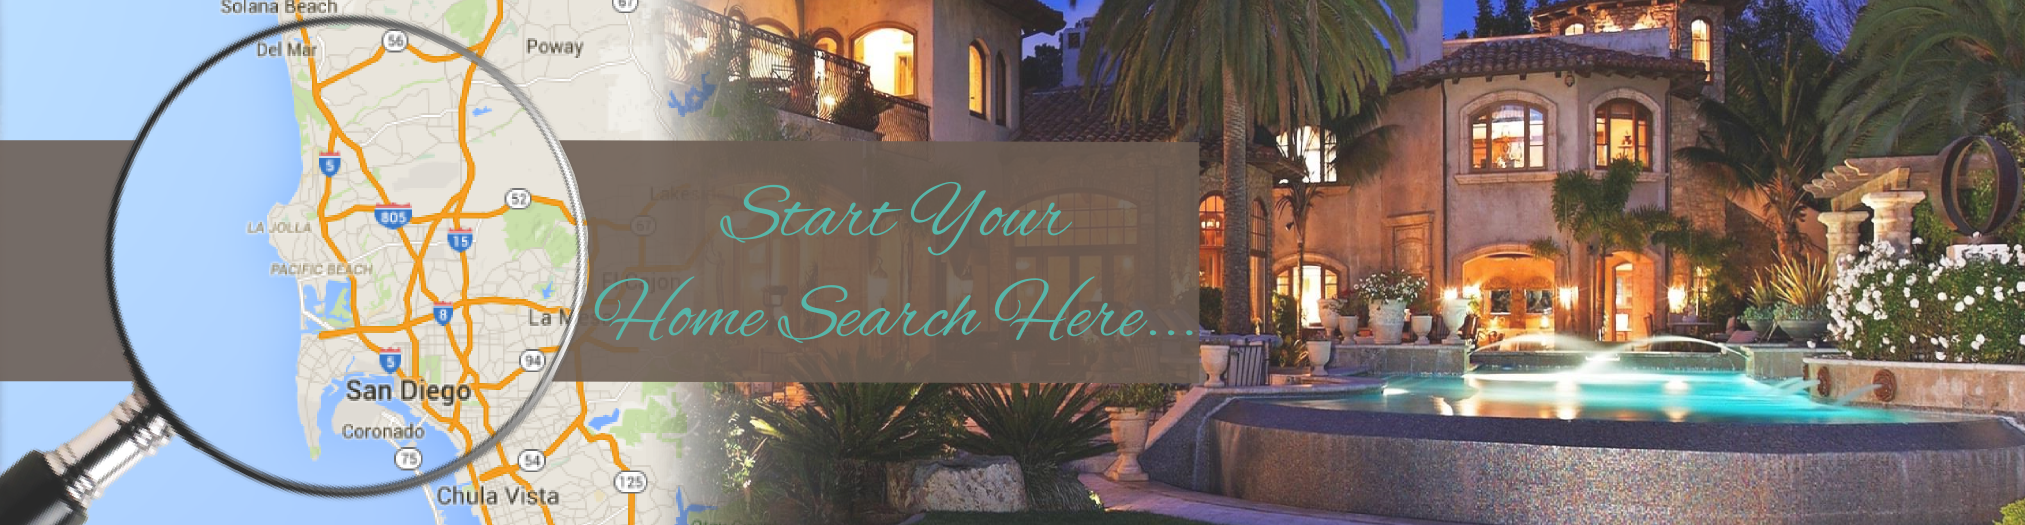 TIFFANY YACULLO, Keller Williams Realty - Home Search - SAN DIEGO  Homes